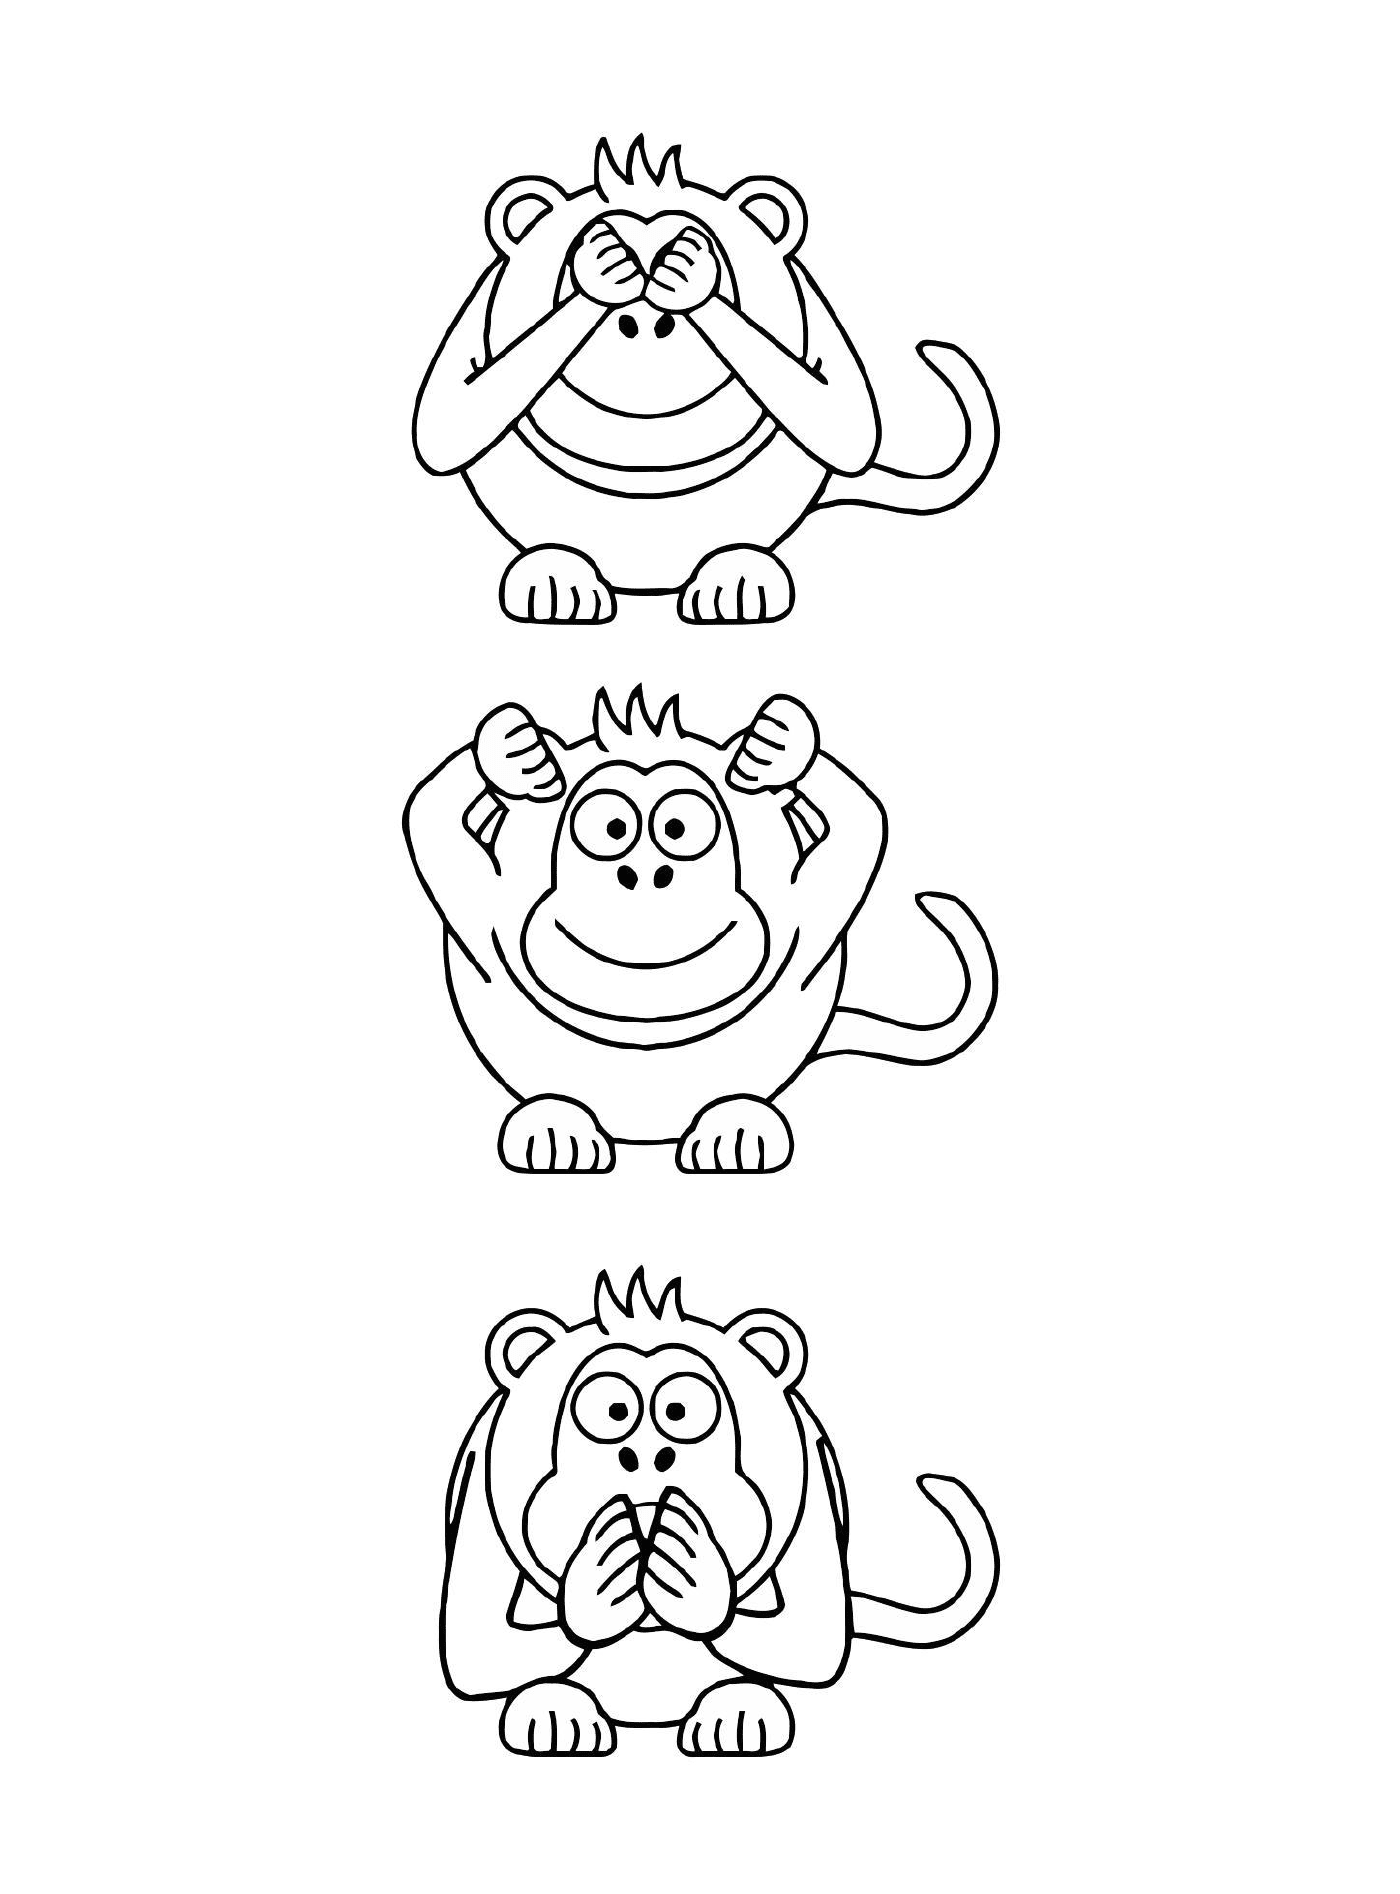  Three monkeys with different expressions 